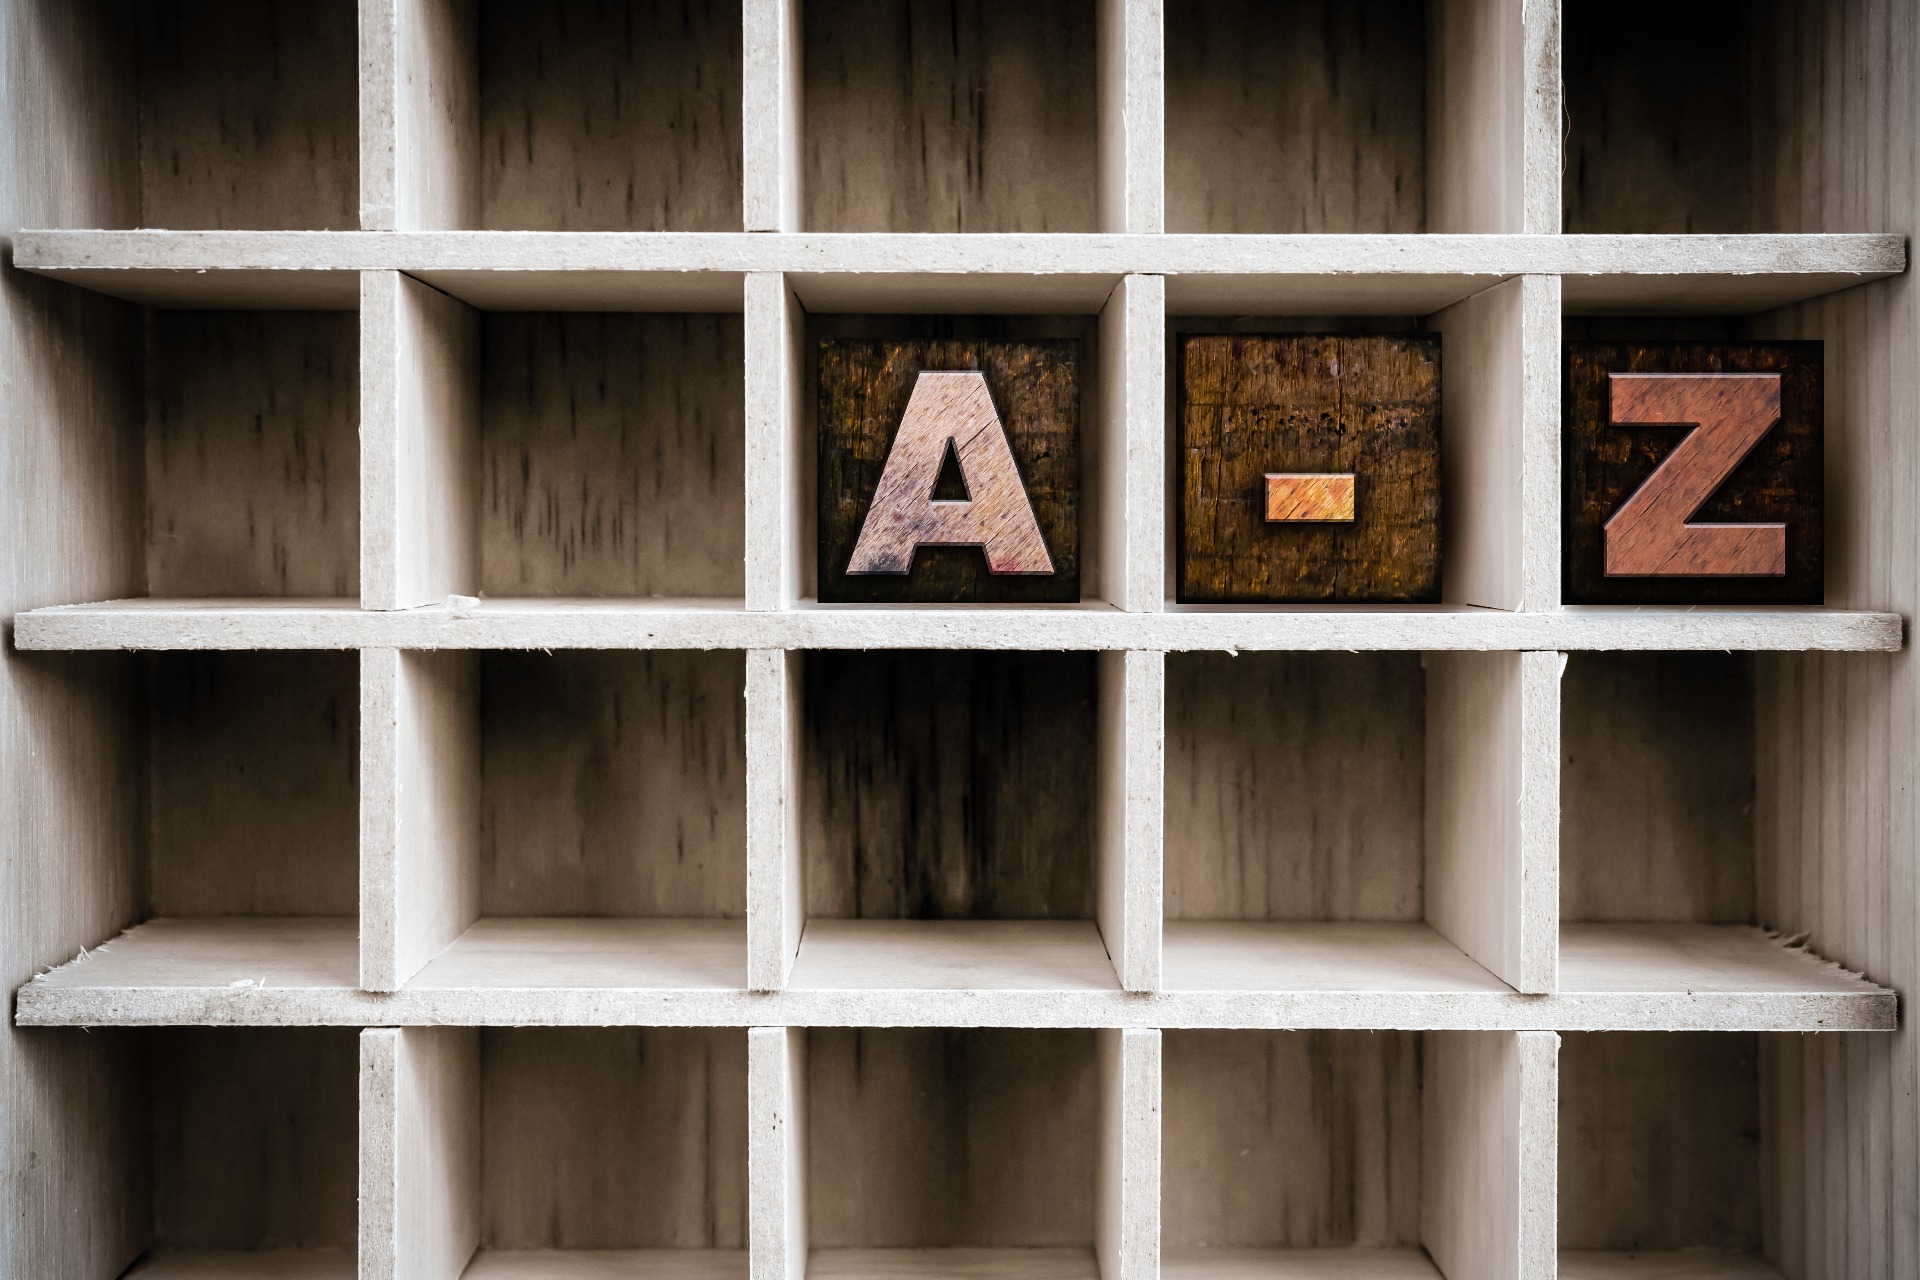 A set of Wooden shelves, with wooden blocks carved into 'A' '-' 'Z' showing A to Z